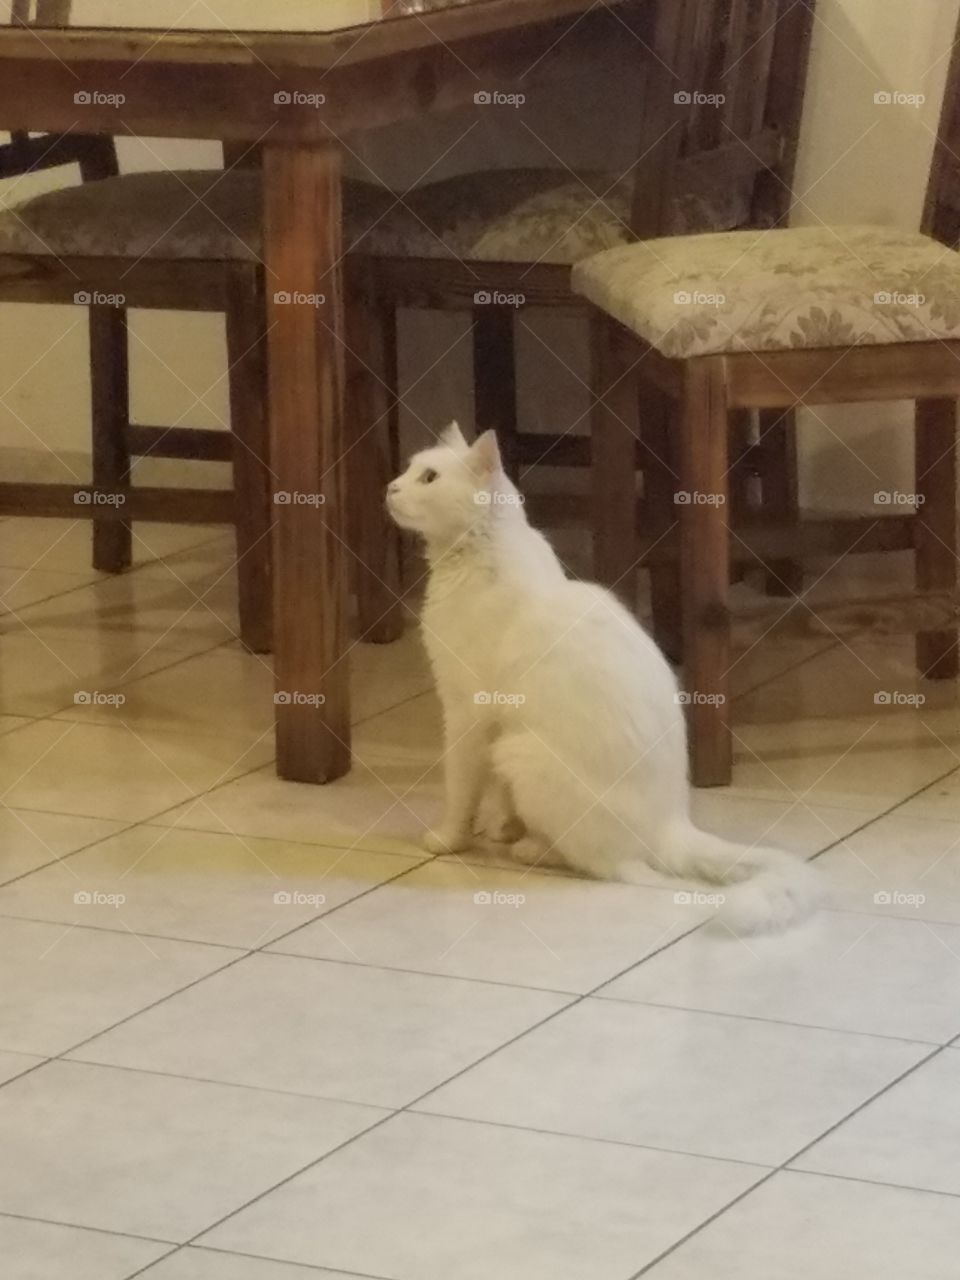 a white cat begging for food inside a restaraunt in old town antalya turkey